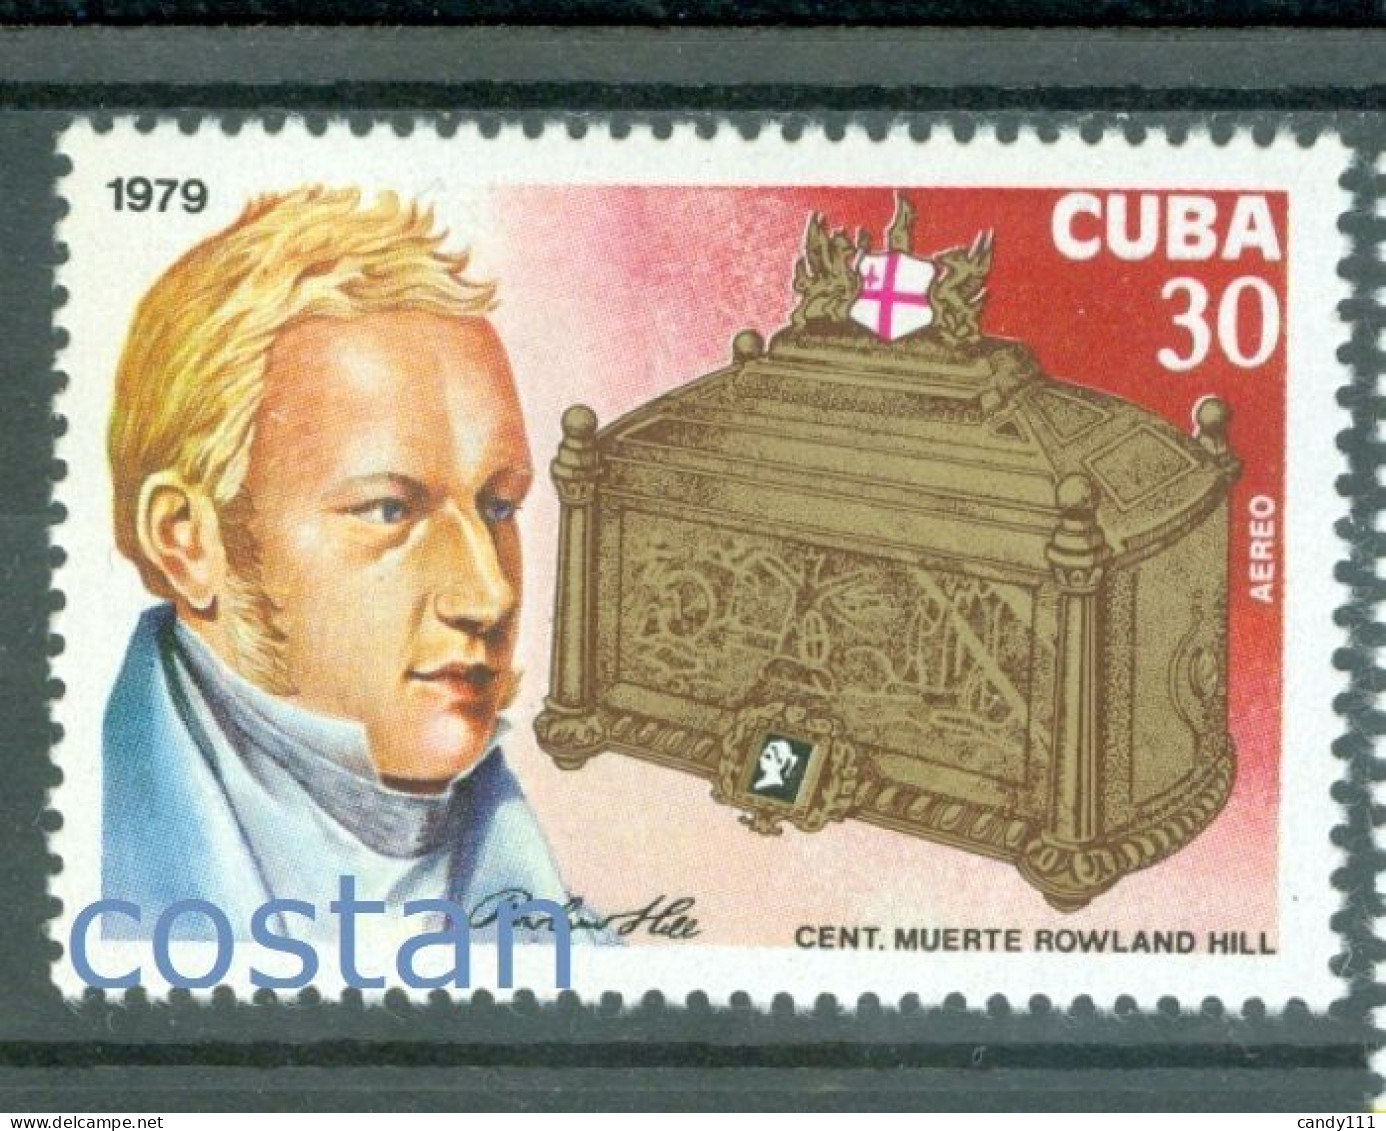 1979 Rowland Hill,Inventor Of Postage Stamps,Reform Postal System,CUBA,2429,MNH - Rowland Hill